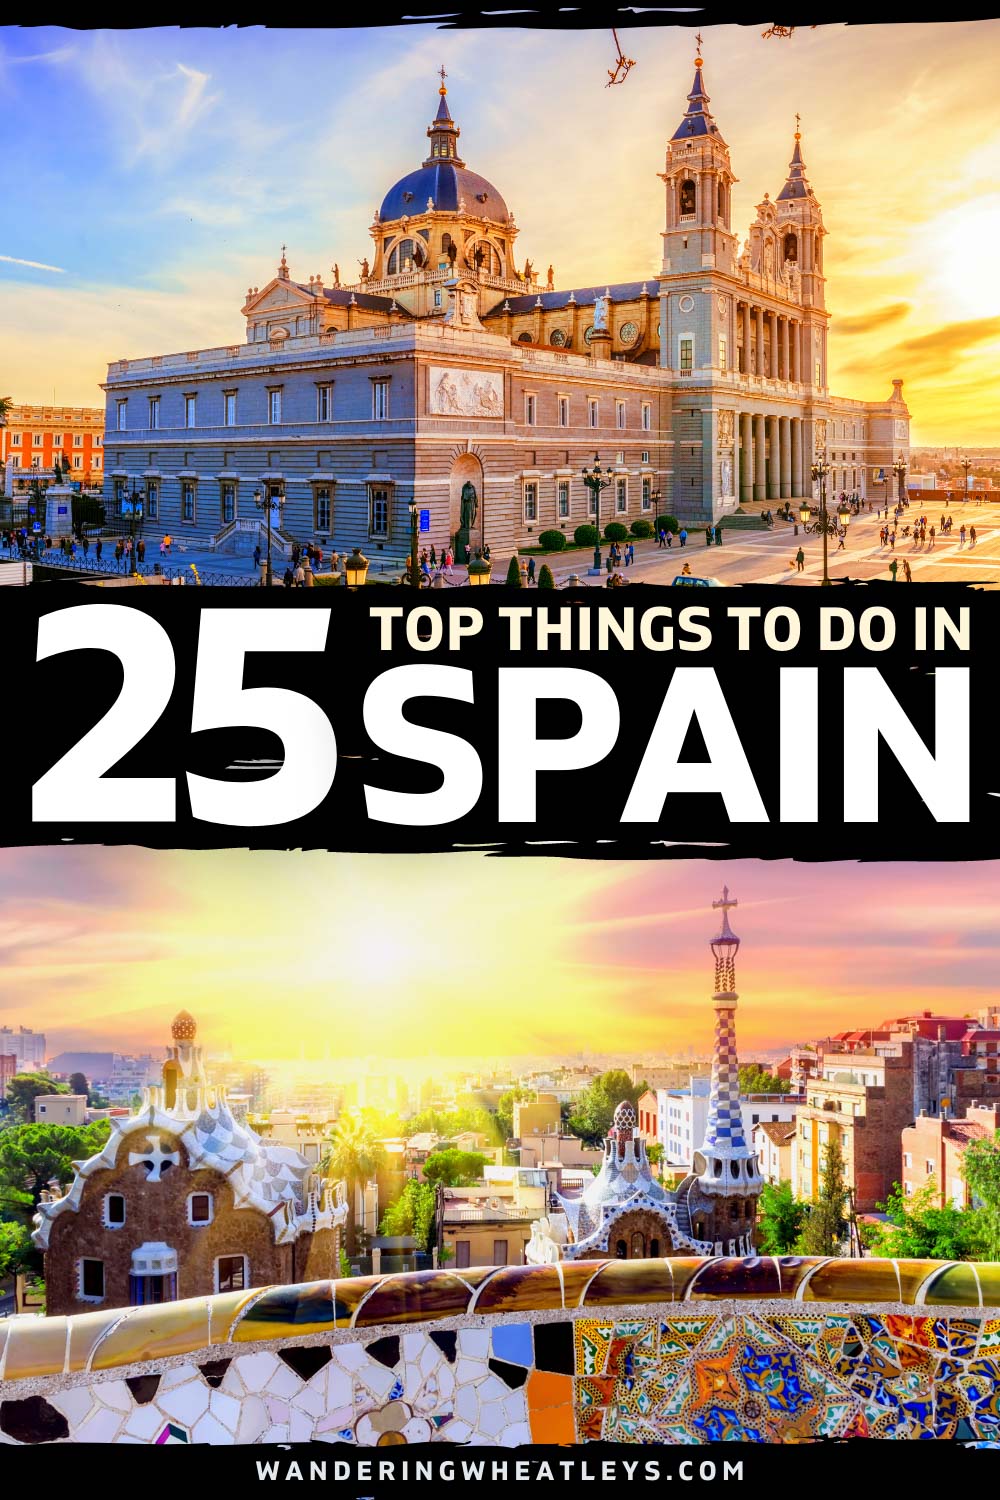 The Best Things to do in Spain